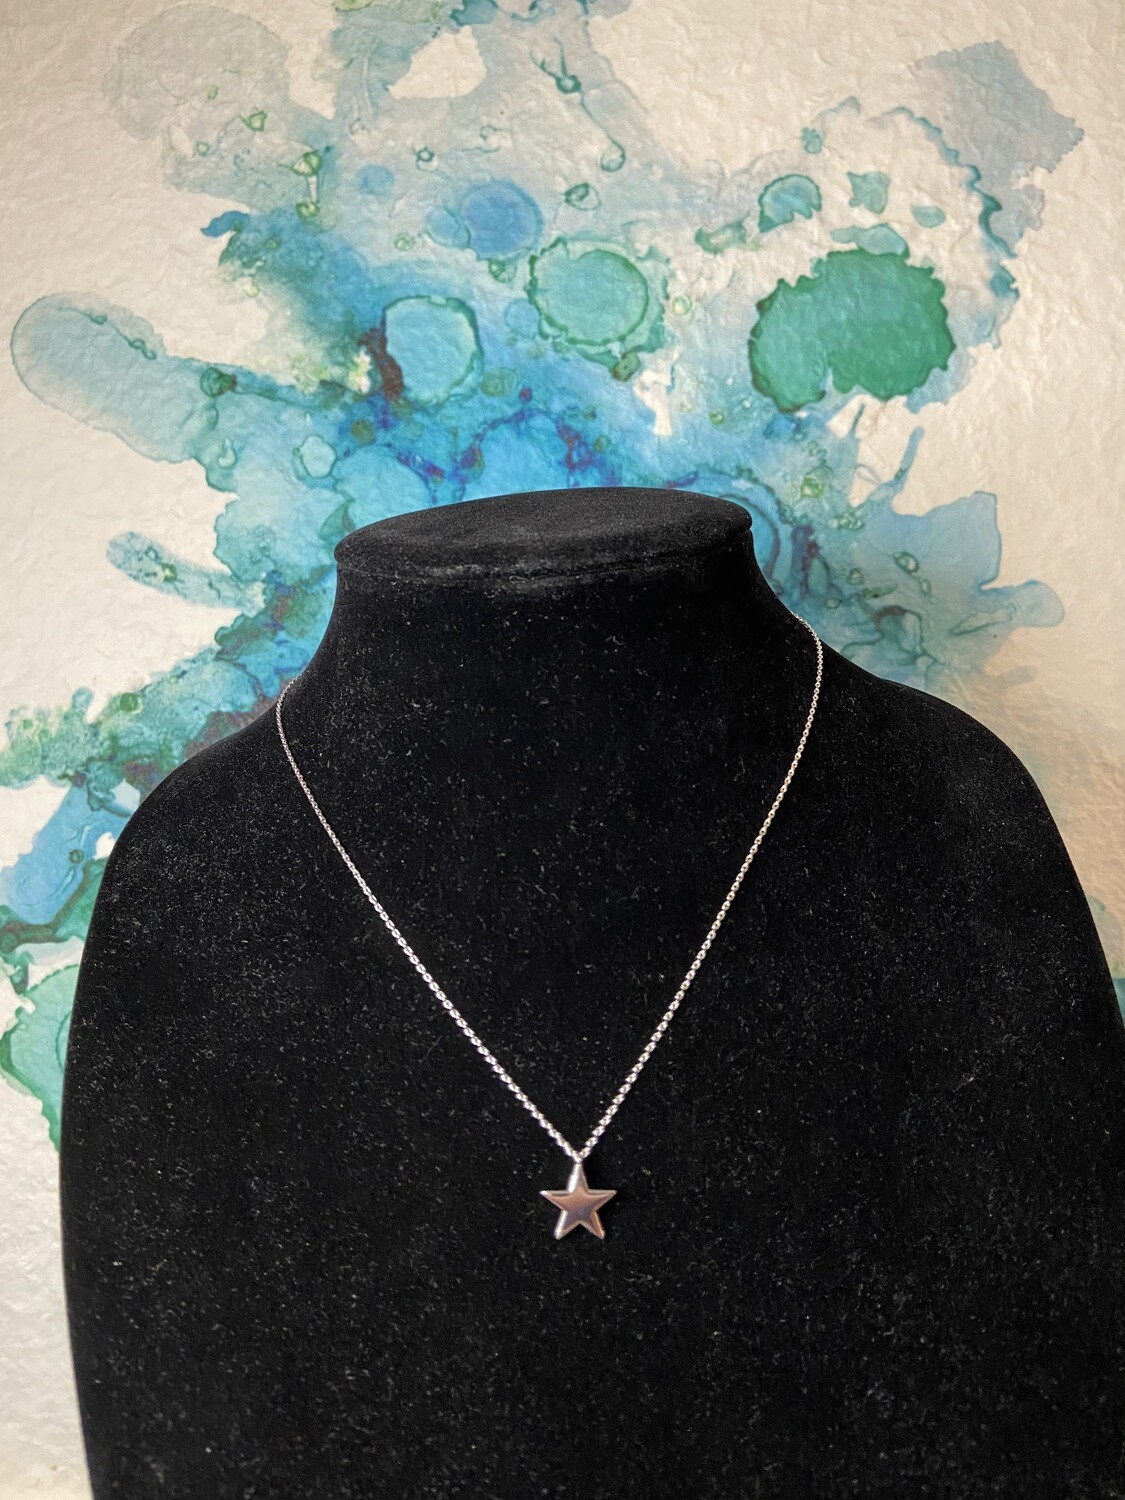 Large Star Necklace